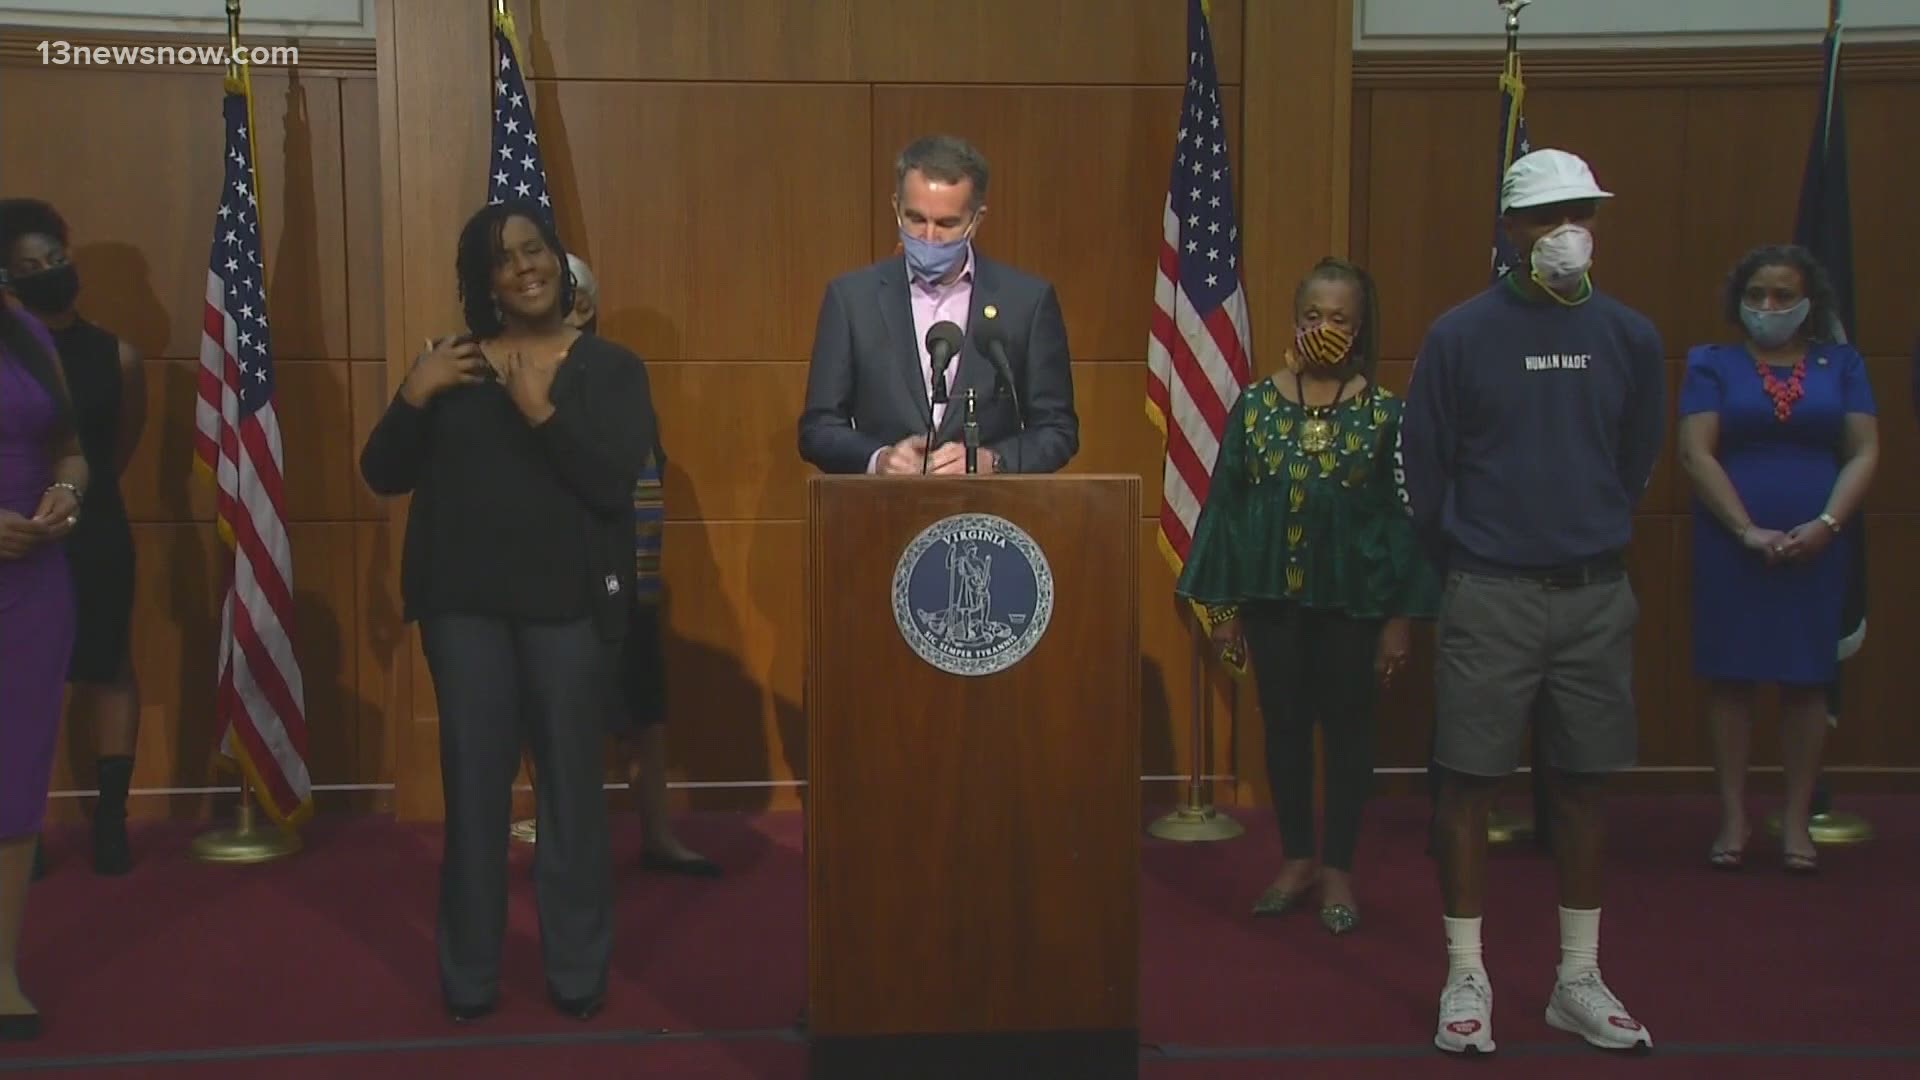 Governor Ralph Northam announced that he will introduce legislation to make Juneteenth (June 19) a paid, state holiday.